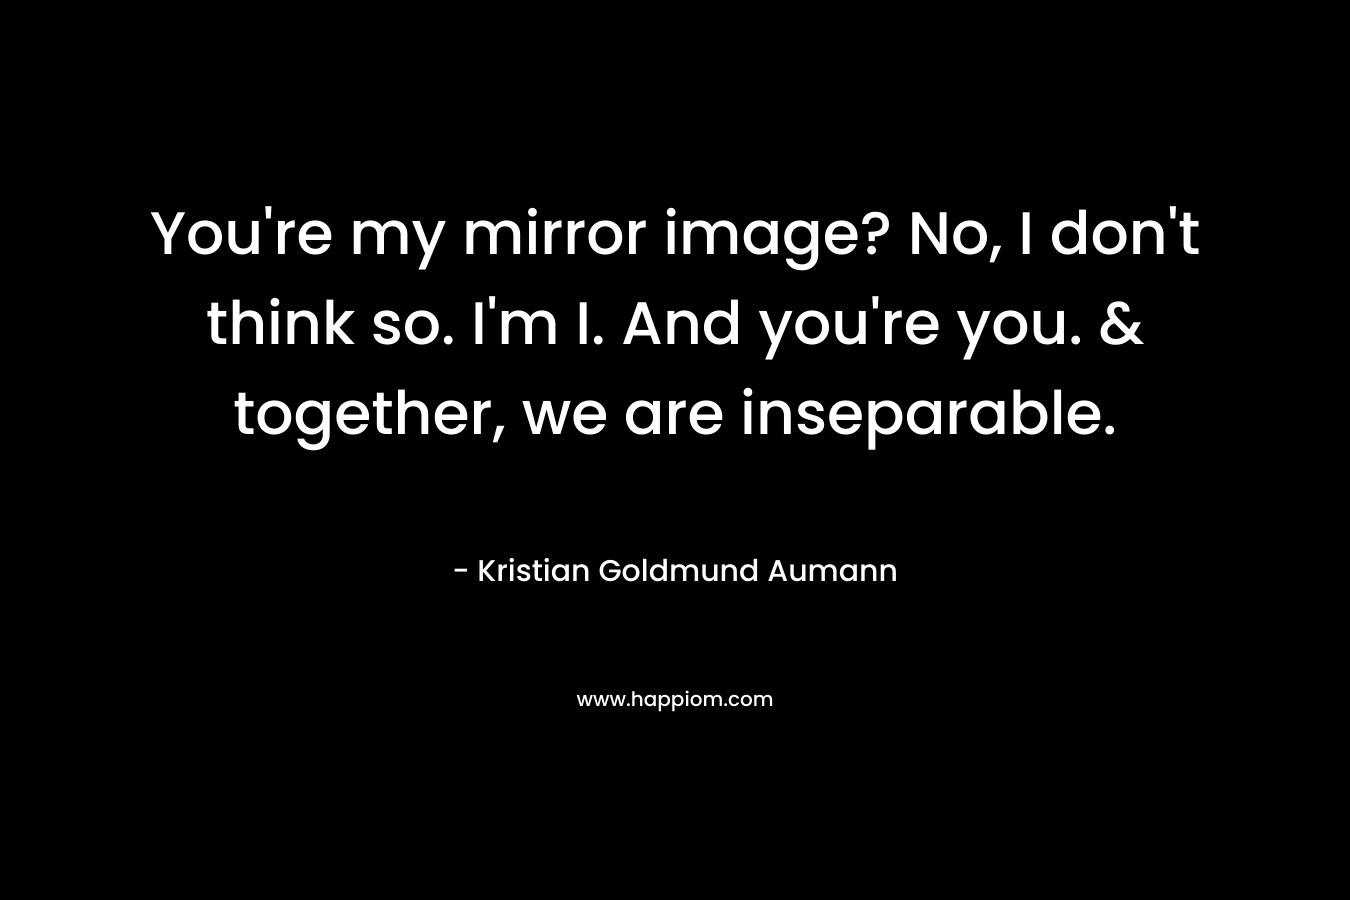 You're my mirror image? No, I don't think so. I'm I. And you're you. & together, we are inseparable.